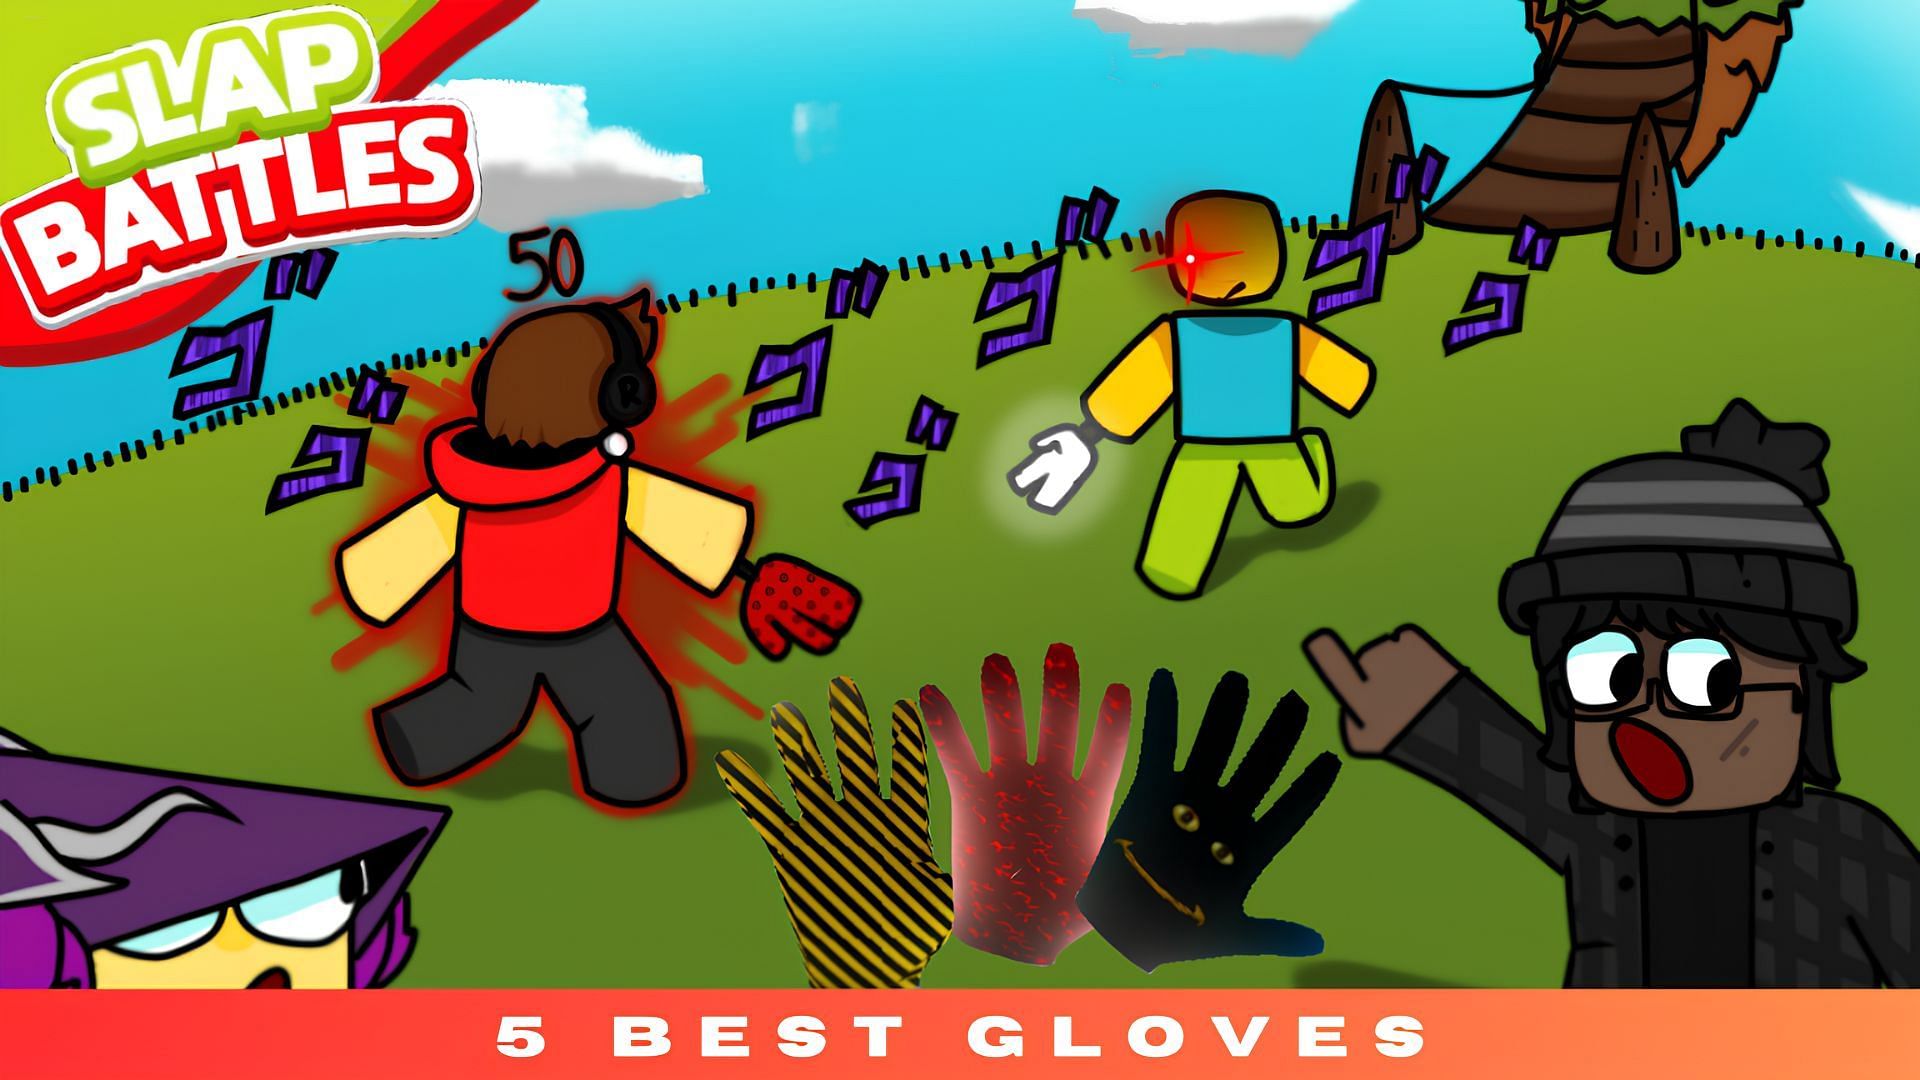 Fists, Roblox Rememed Meme Game Wiki